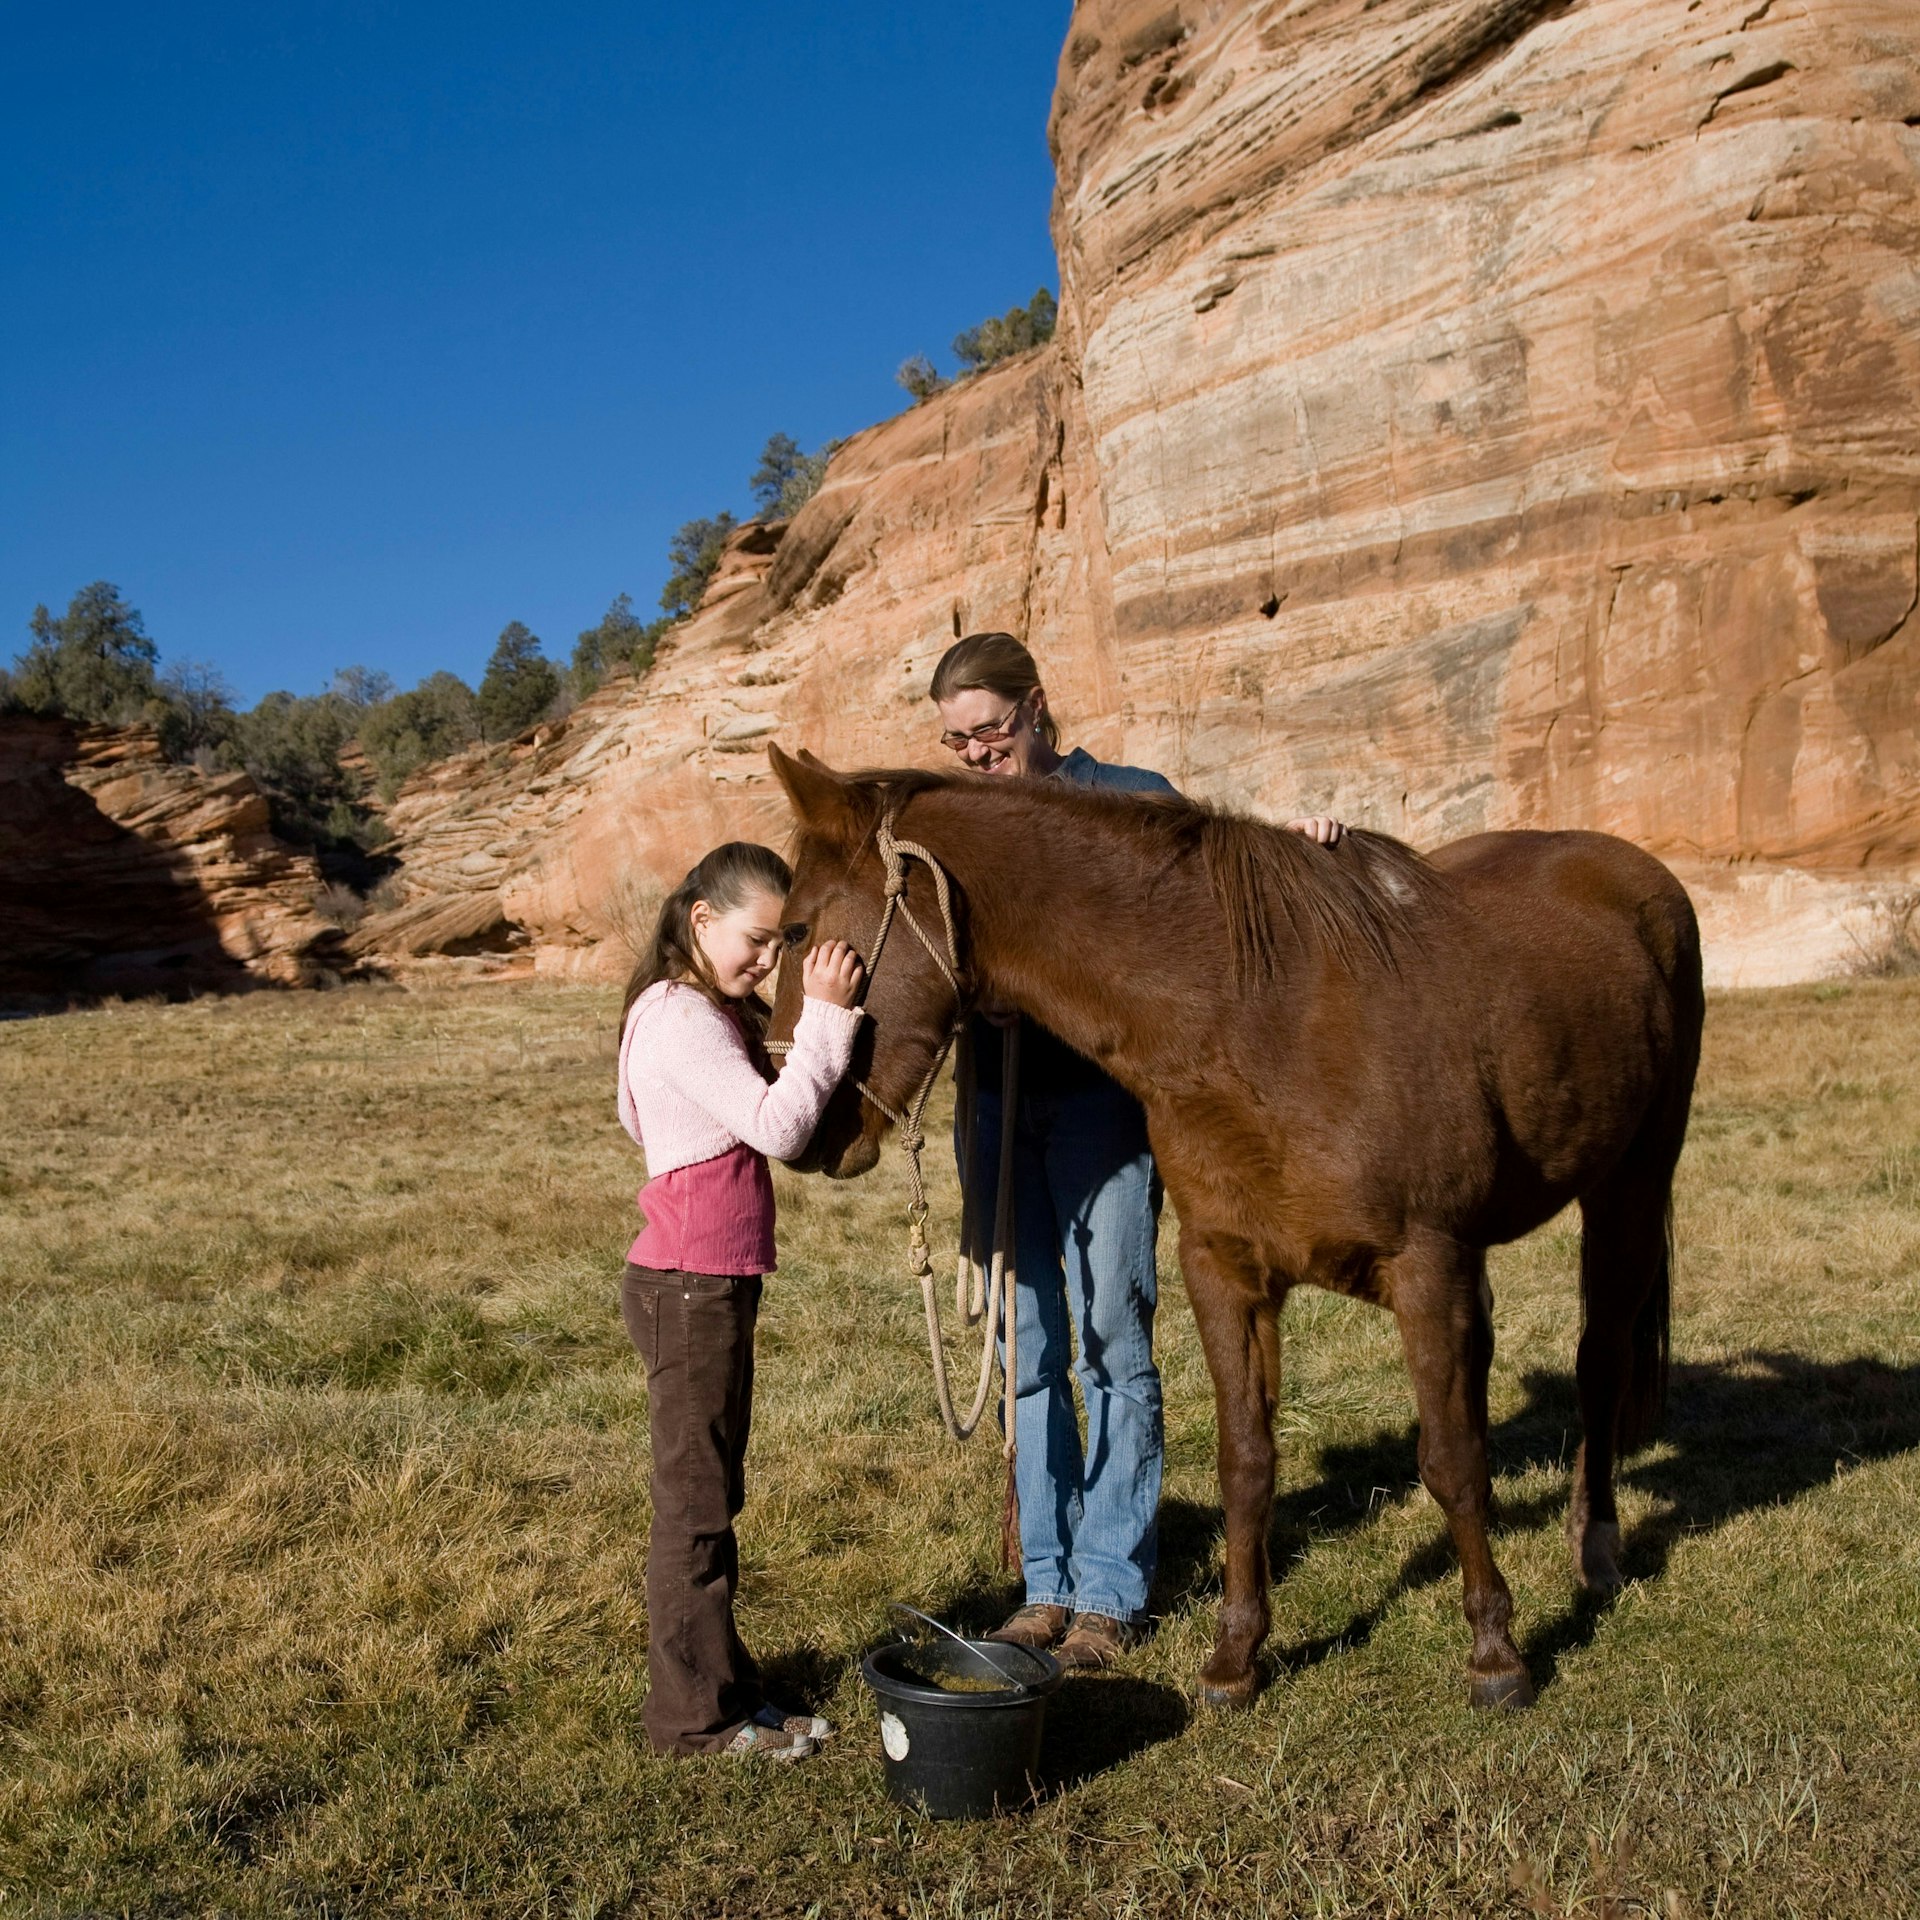 A girl feeds a horse in front of a rock formation and a bright blue sky at Best Friends Animal Sanctuary, Utah